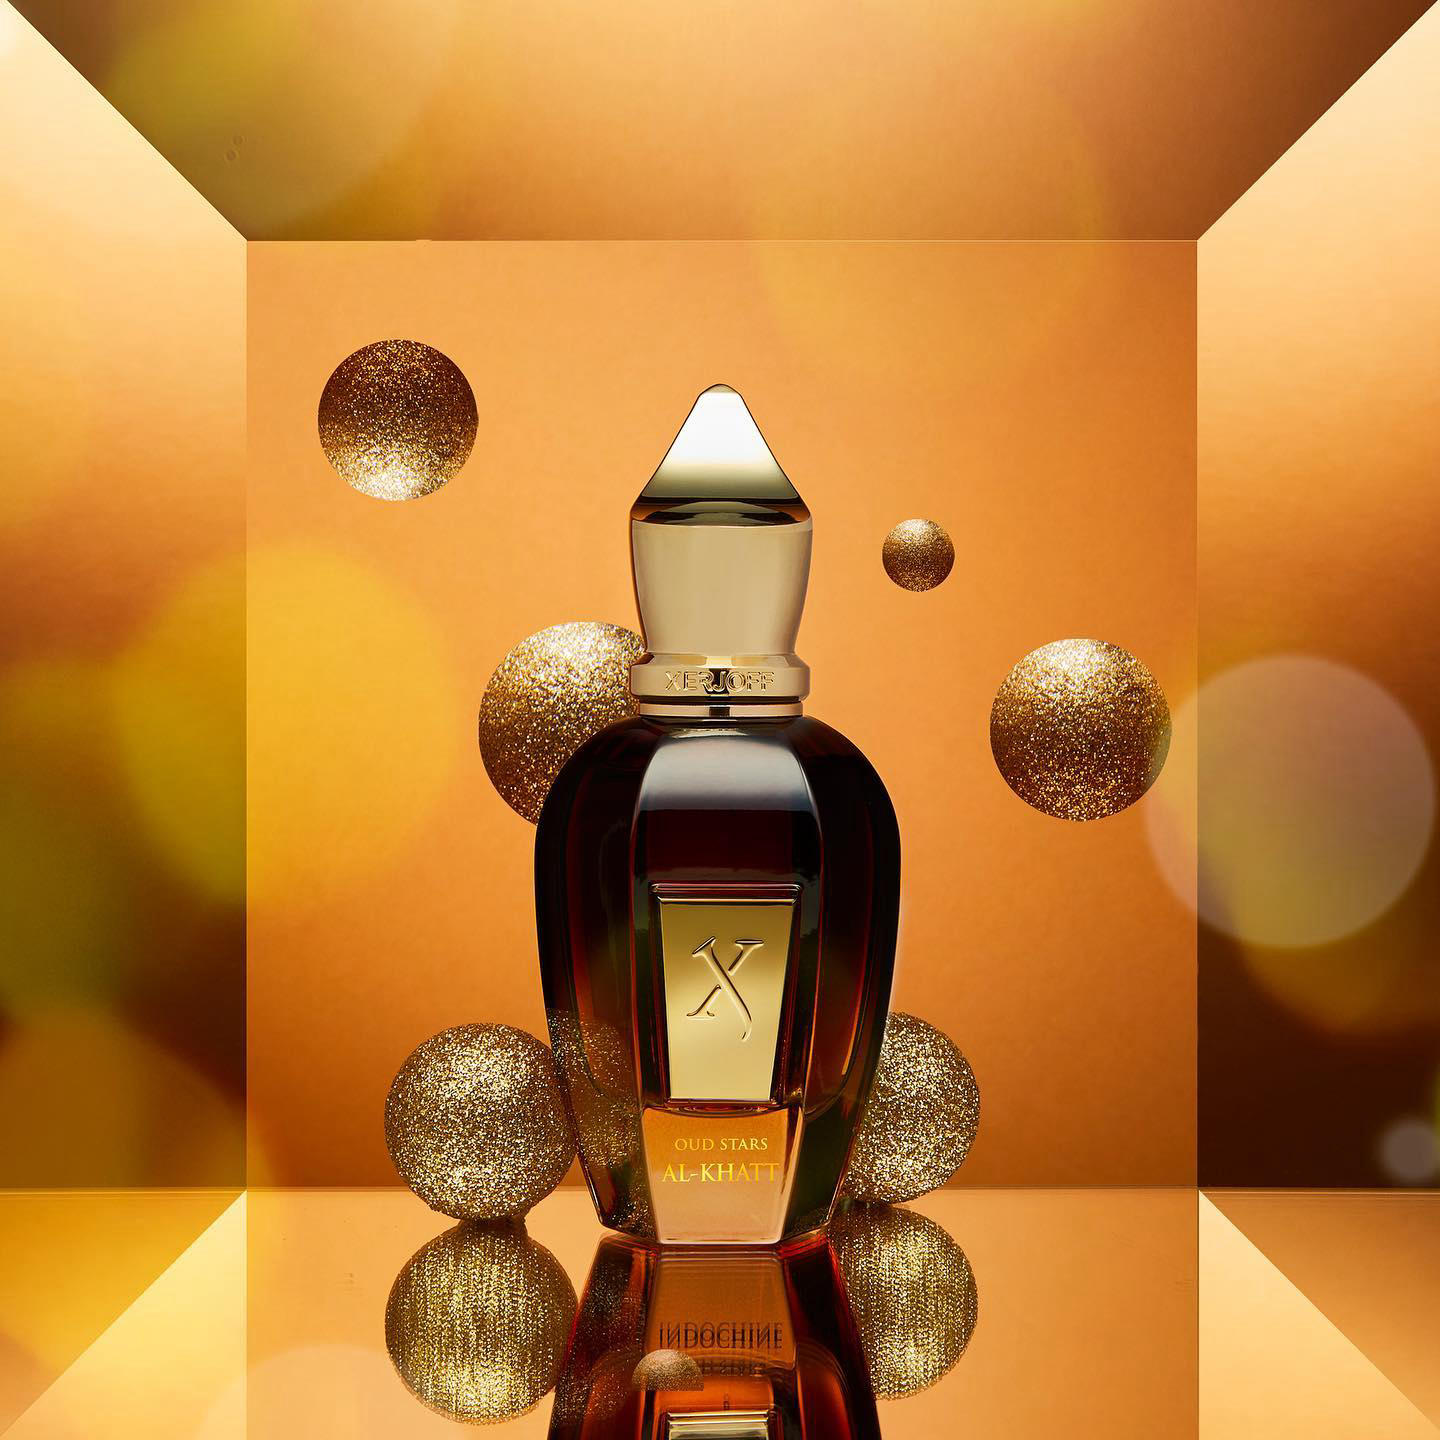 image  1 Xerjoff - Gift #AlKhatt, a sensual invitation to a far-off land, to someone special this season